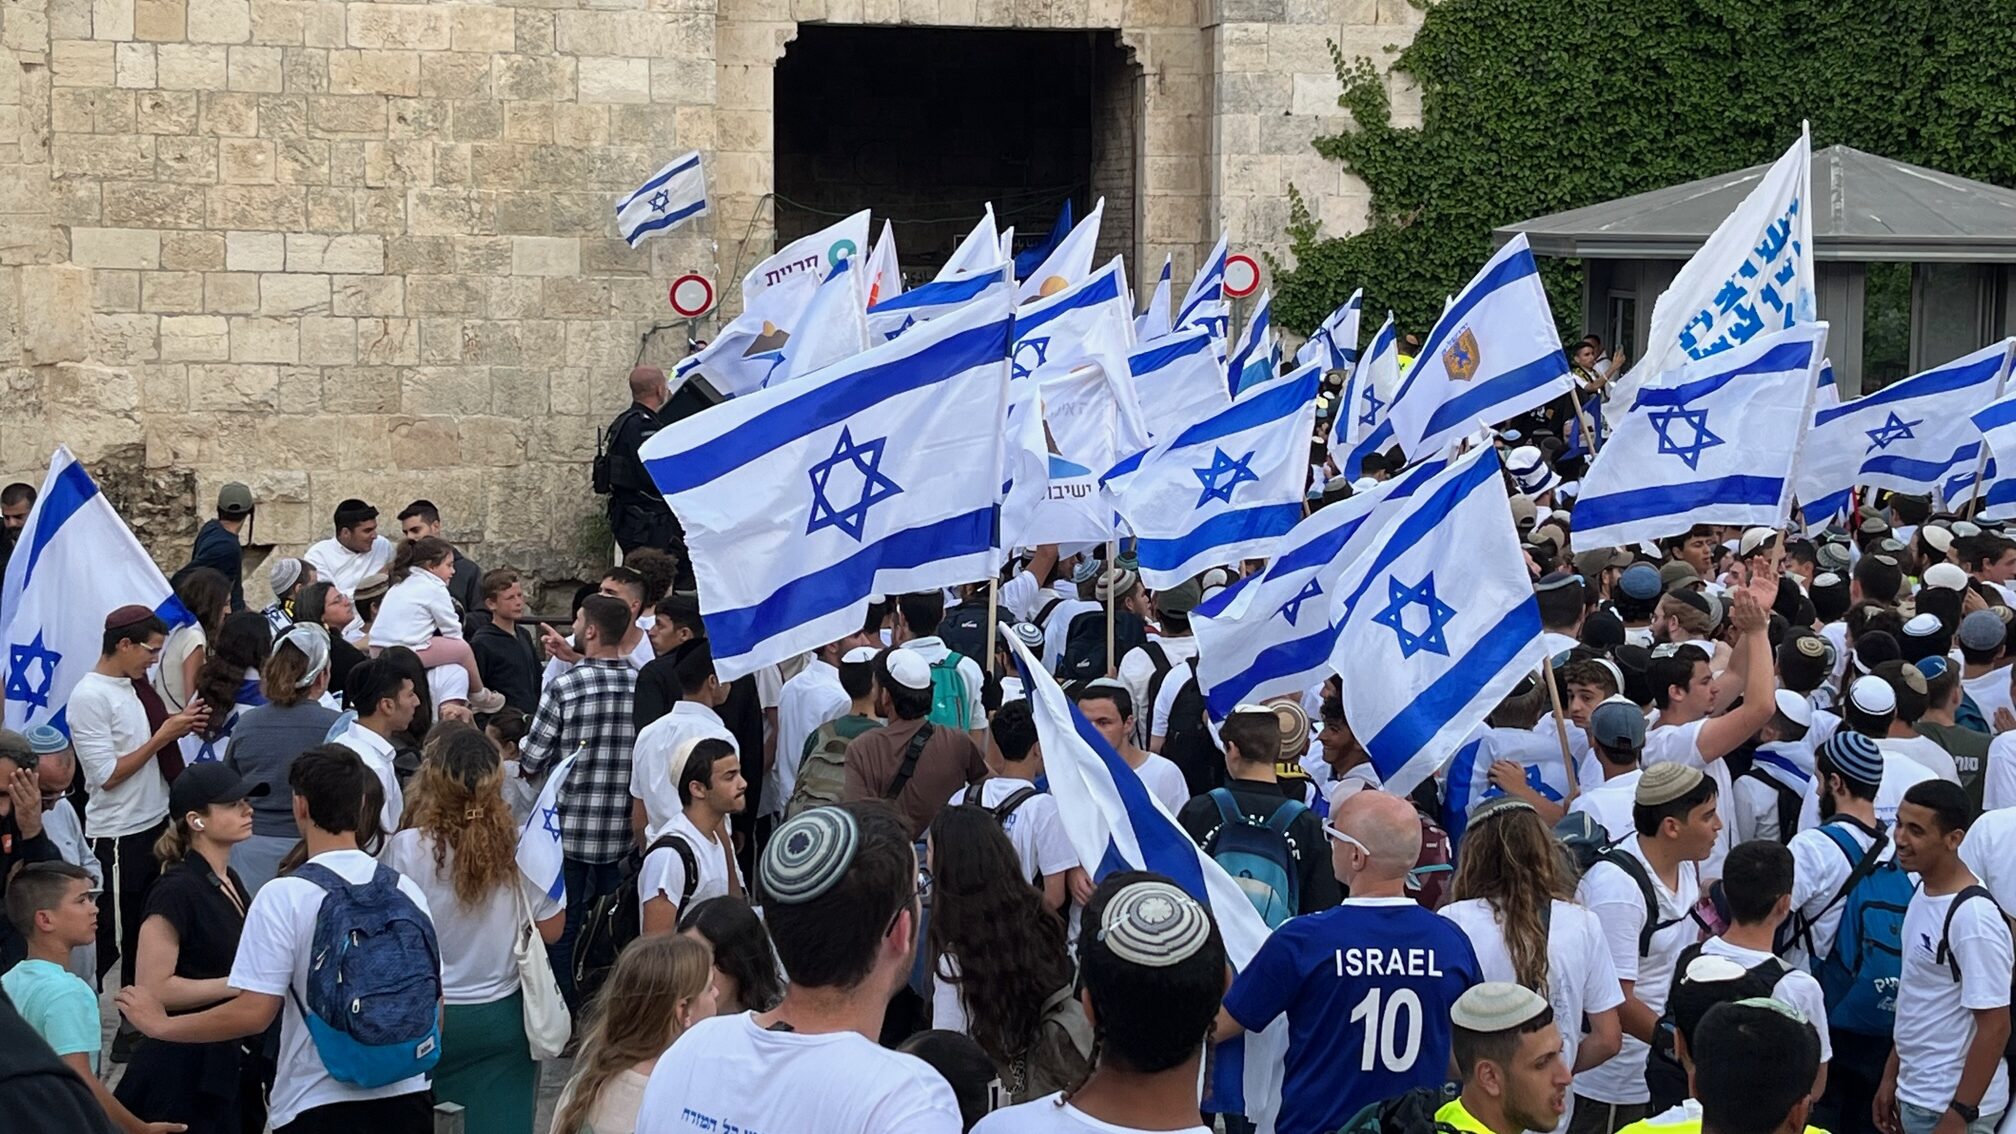 Jerusalem Day Passes Mostly Peacefully Despite Some Scuffles